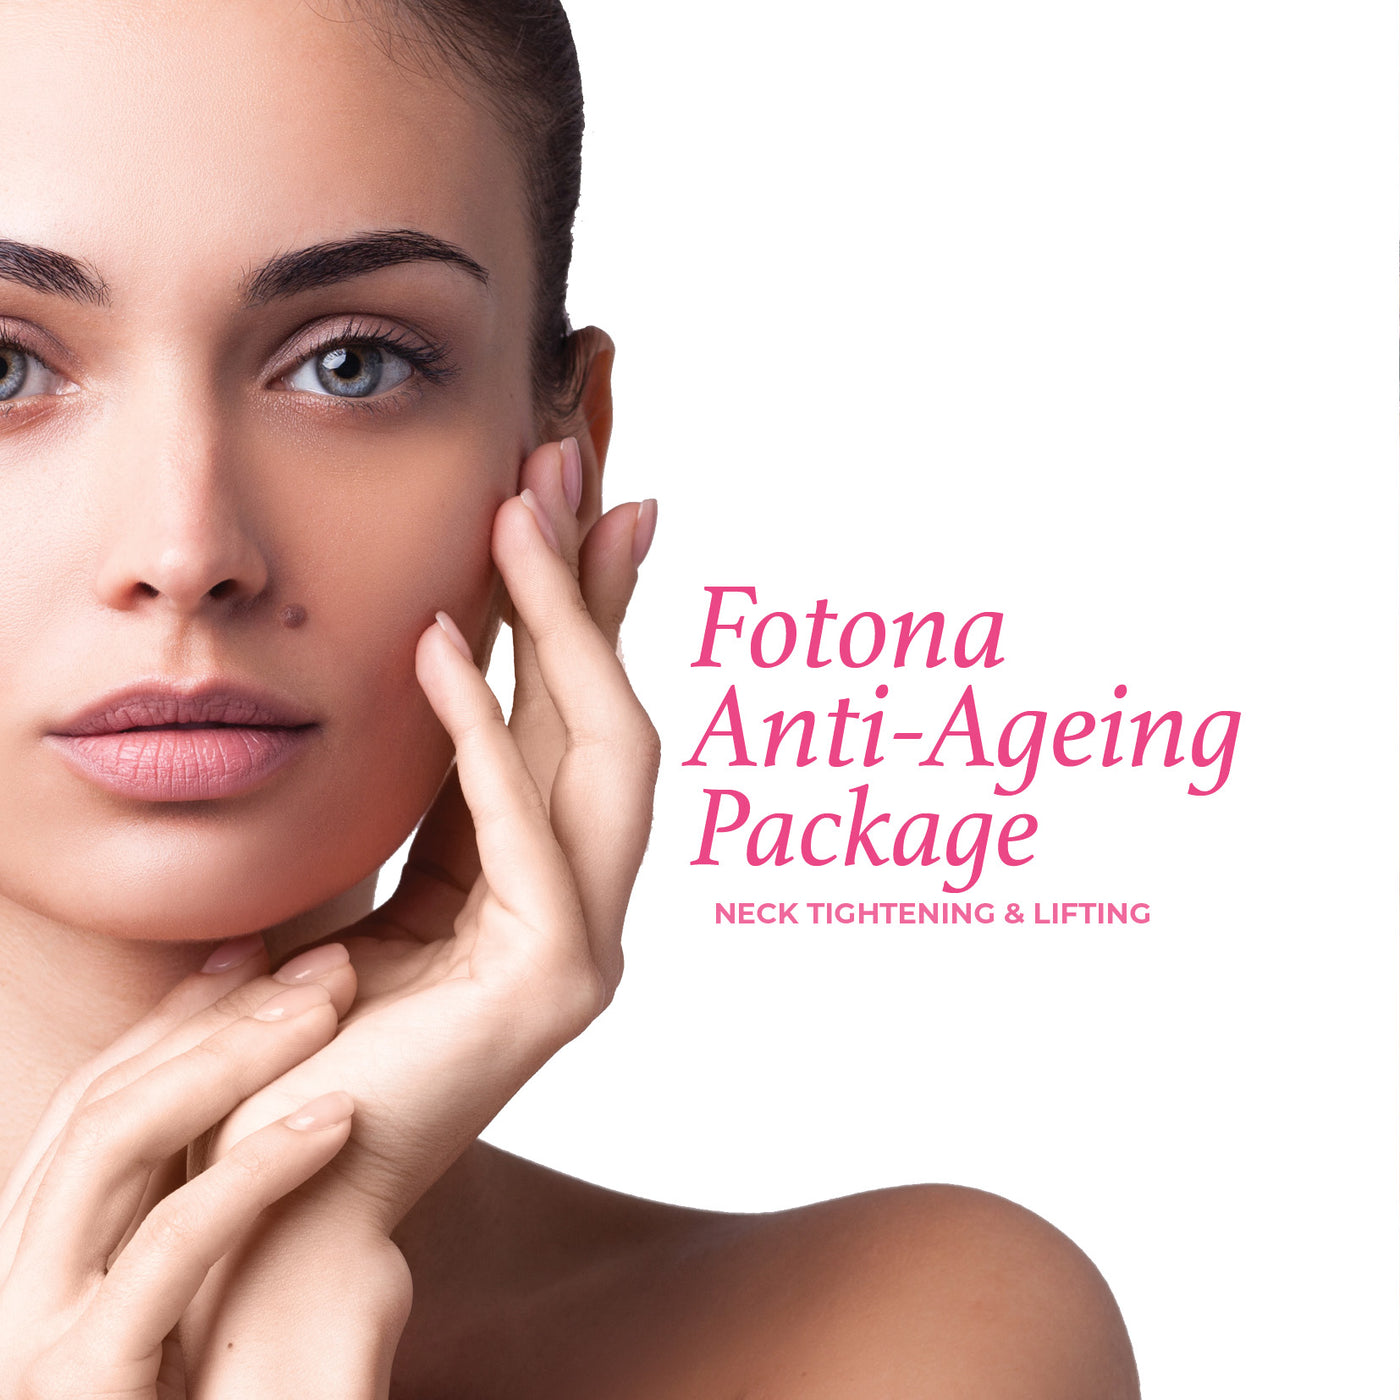 Anti-Ageing Package - Neck Tightening & Lifting